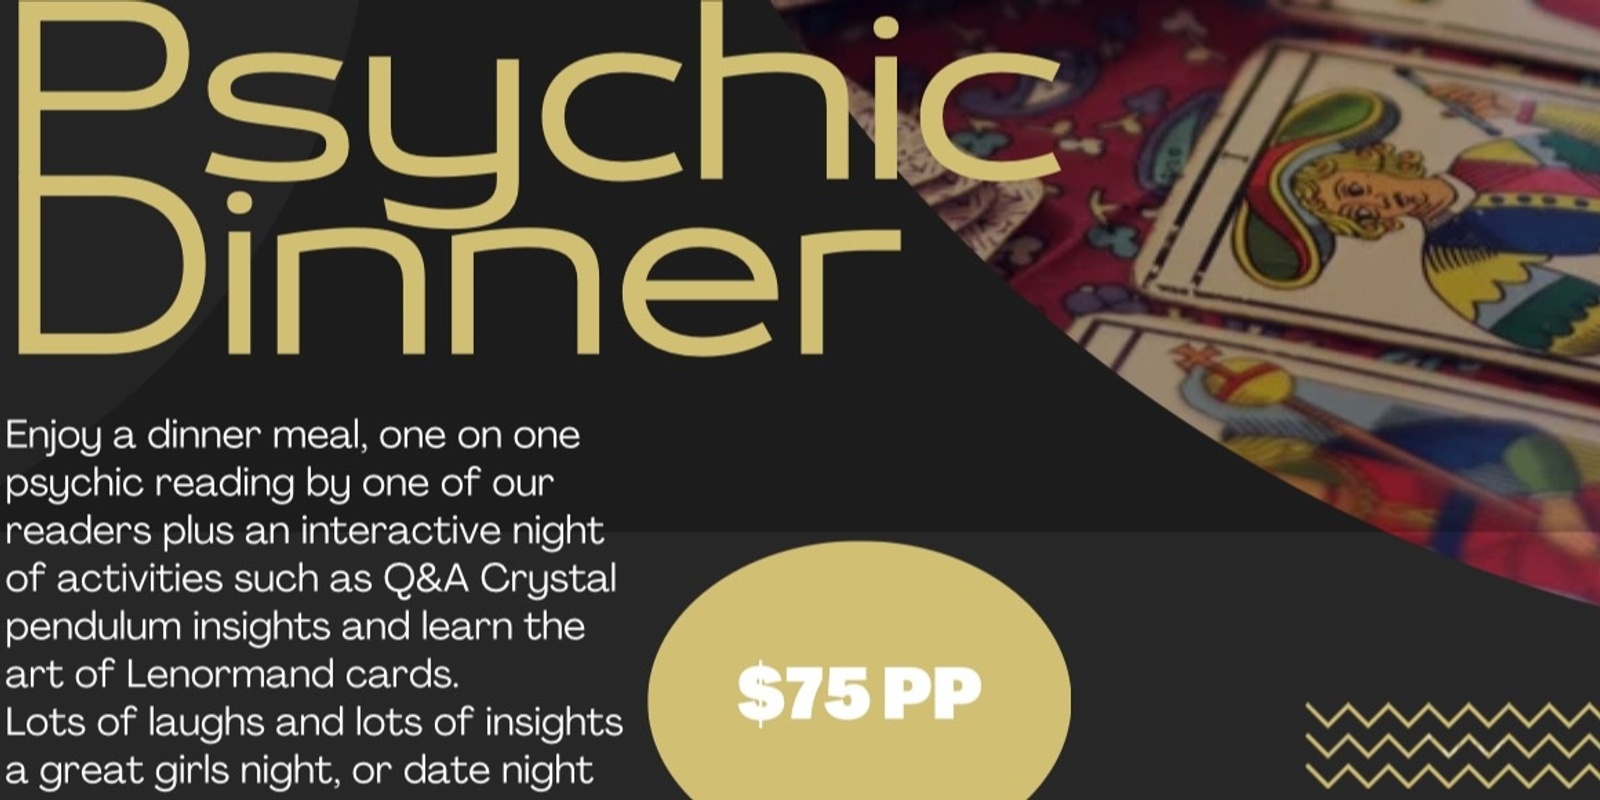 Banner image for Psychic Dinner @Seaford hotel 16th Sept